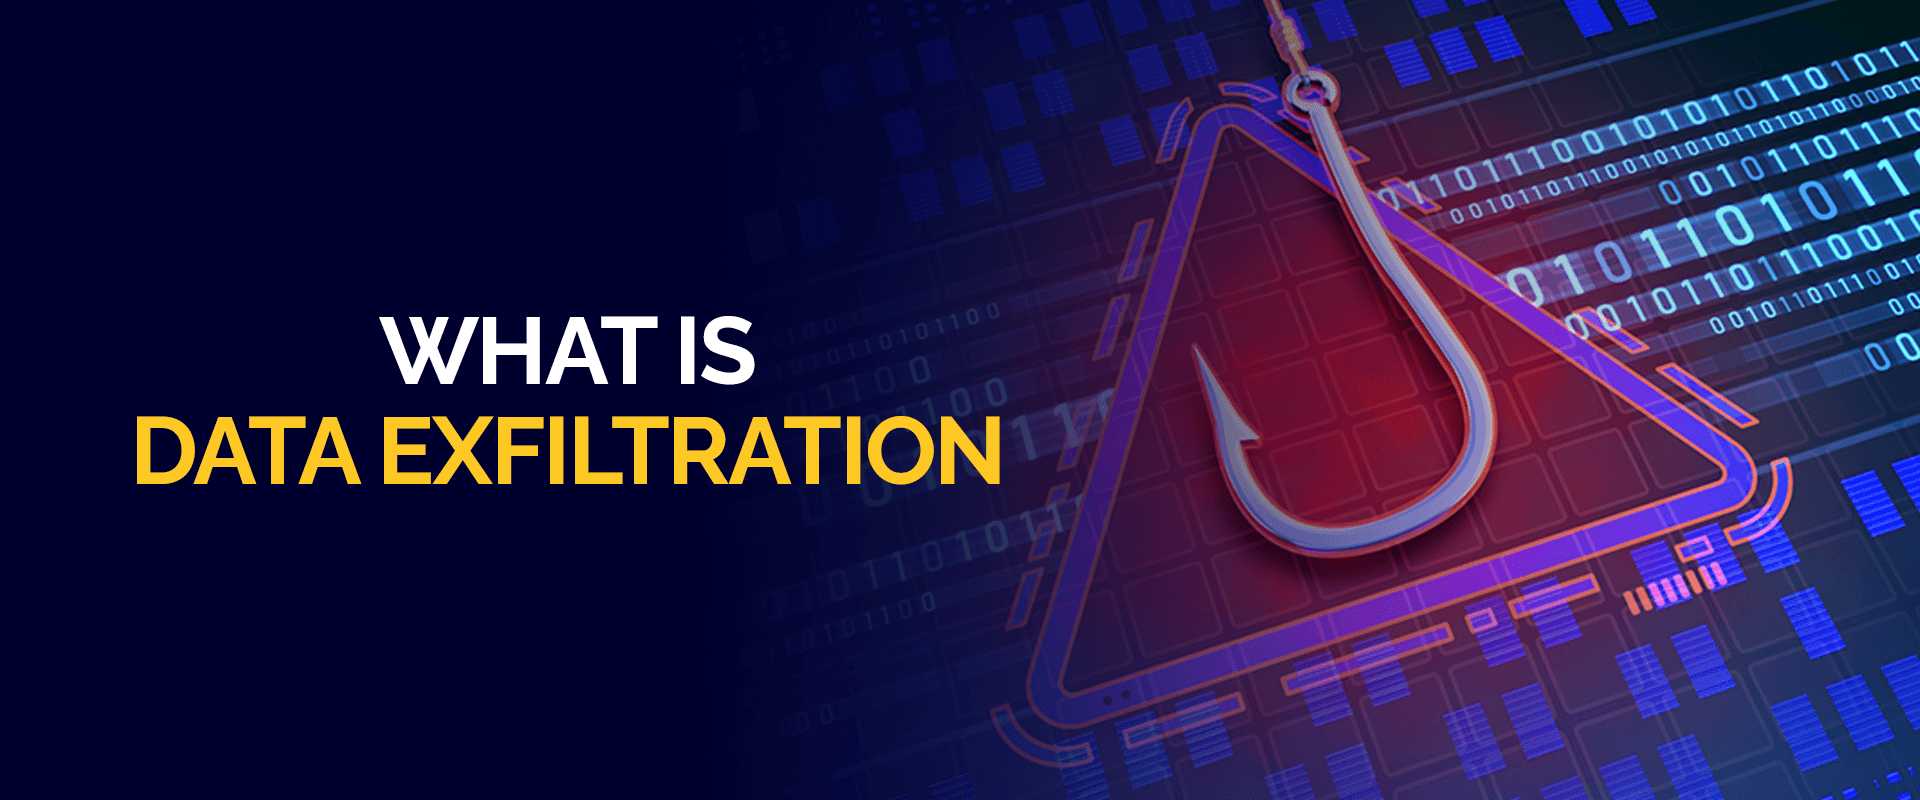 What is Data Exfiltration